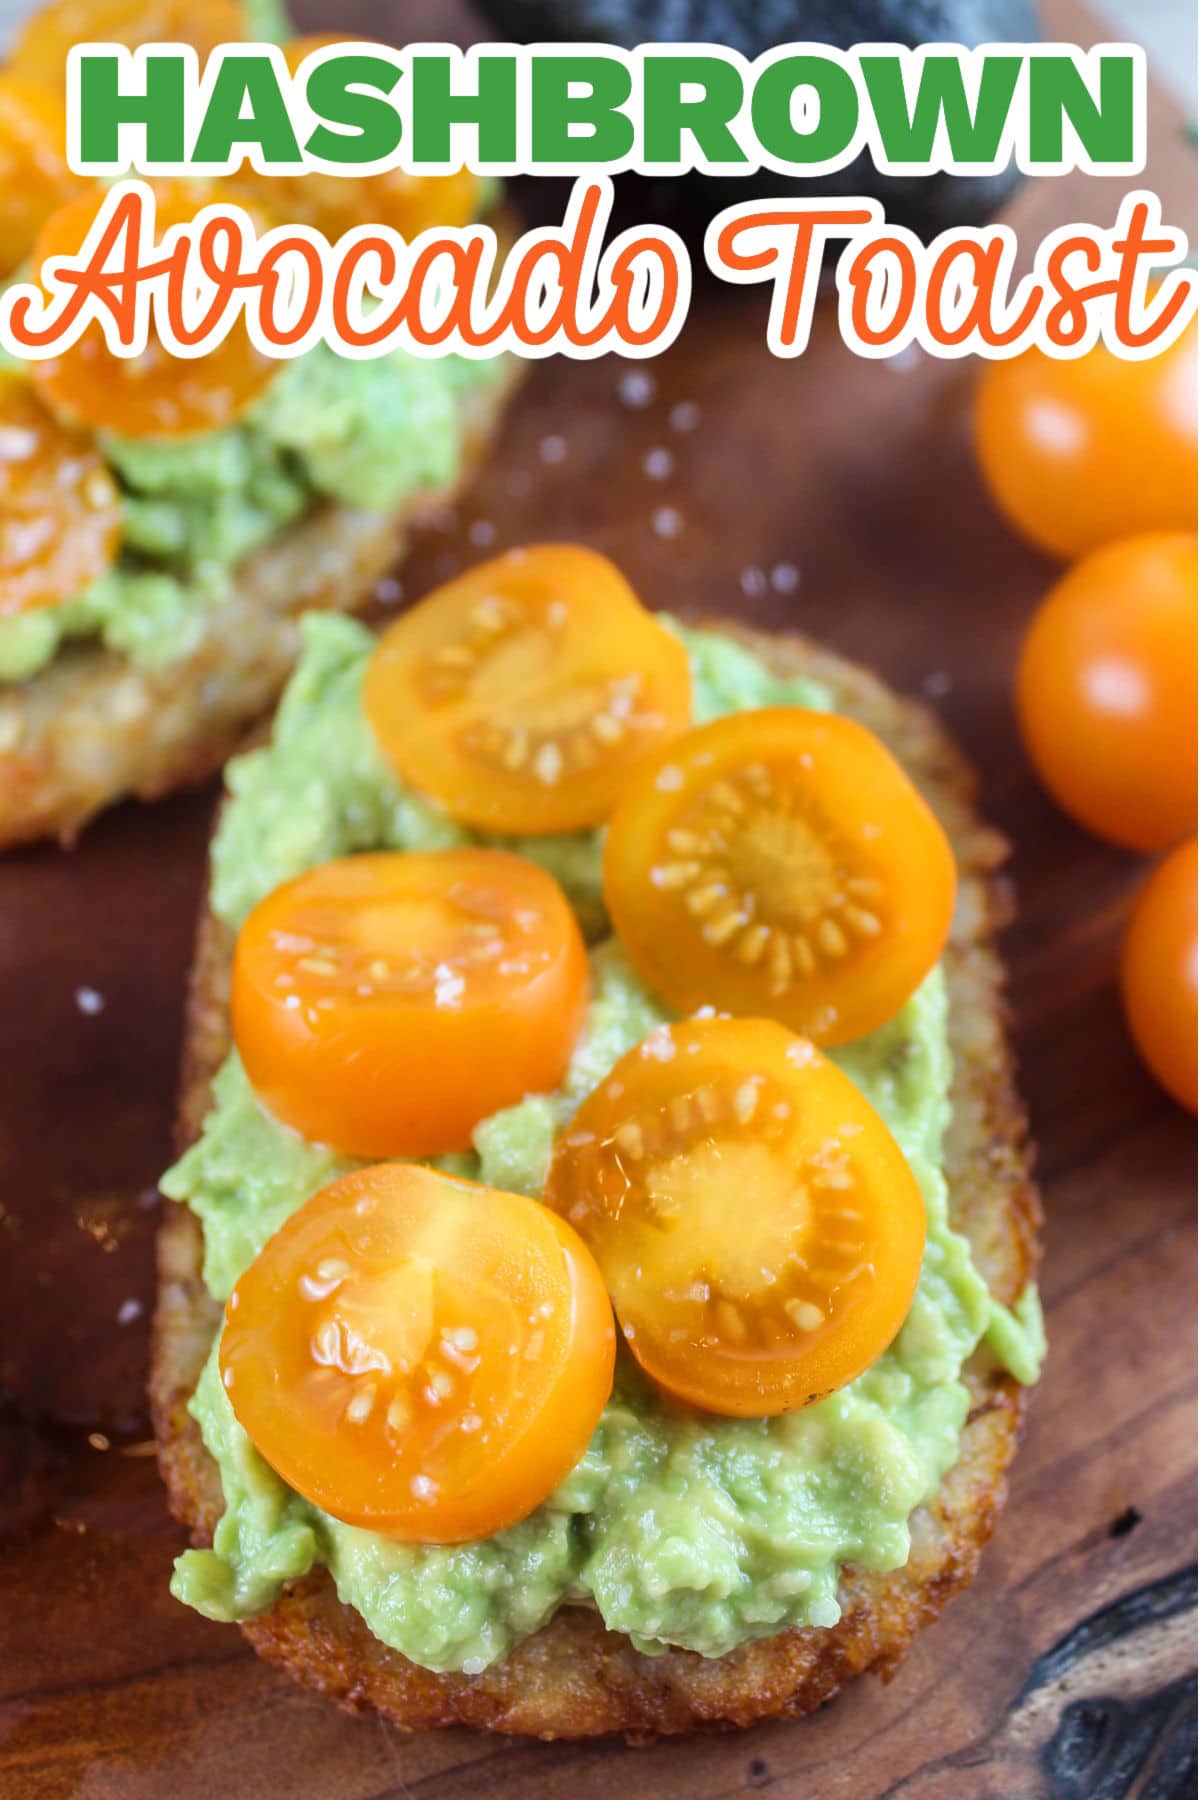 In another "as seen on TikTok", we swapped out hashbrowns for the bread and made Avocado Hashbrown Toast! You're going to love it!! It's a perfect brunch treat! The crunchy hashbrown was really tasty and my quick avocado mash was cool and refreshing.  via @foodhussy